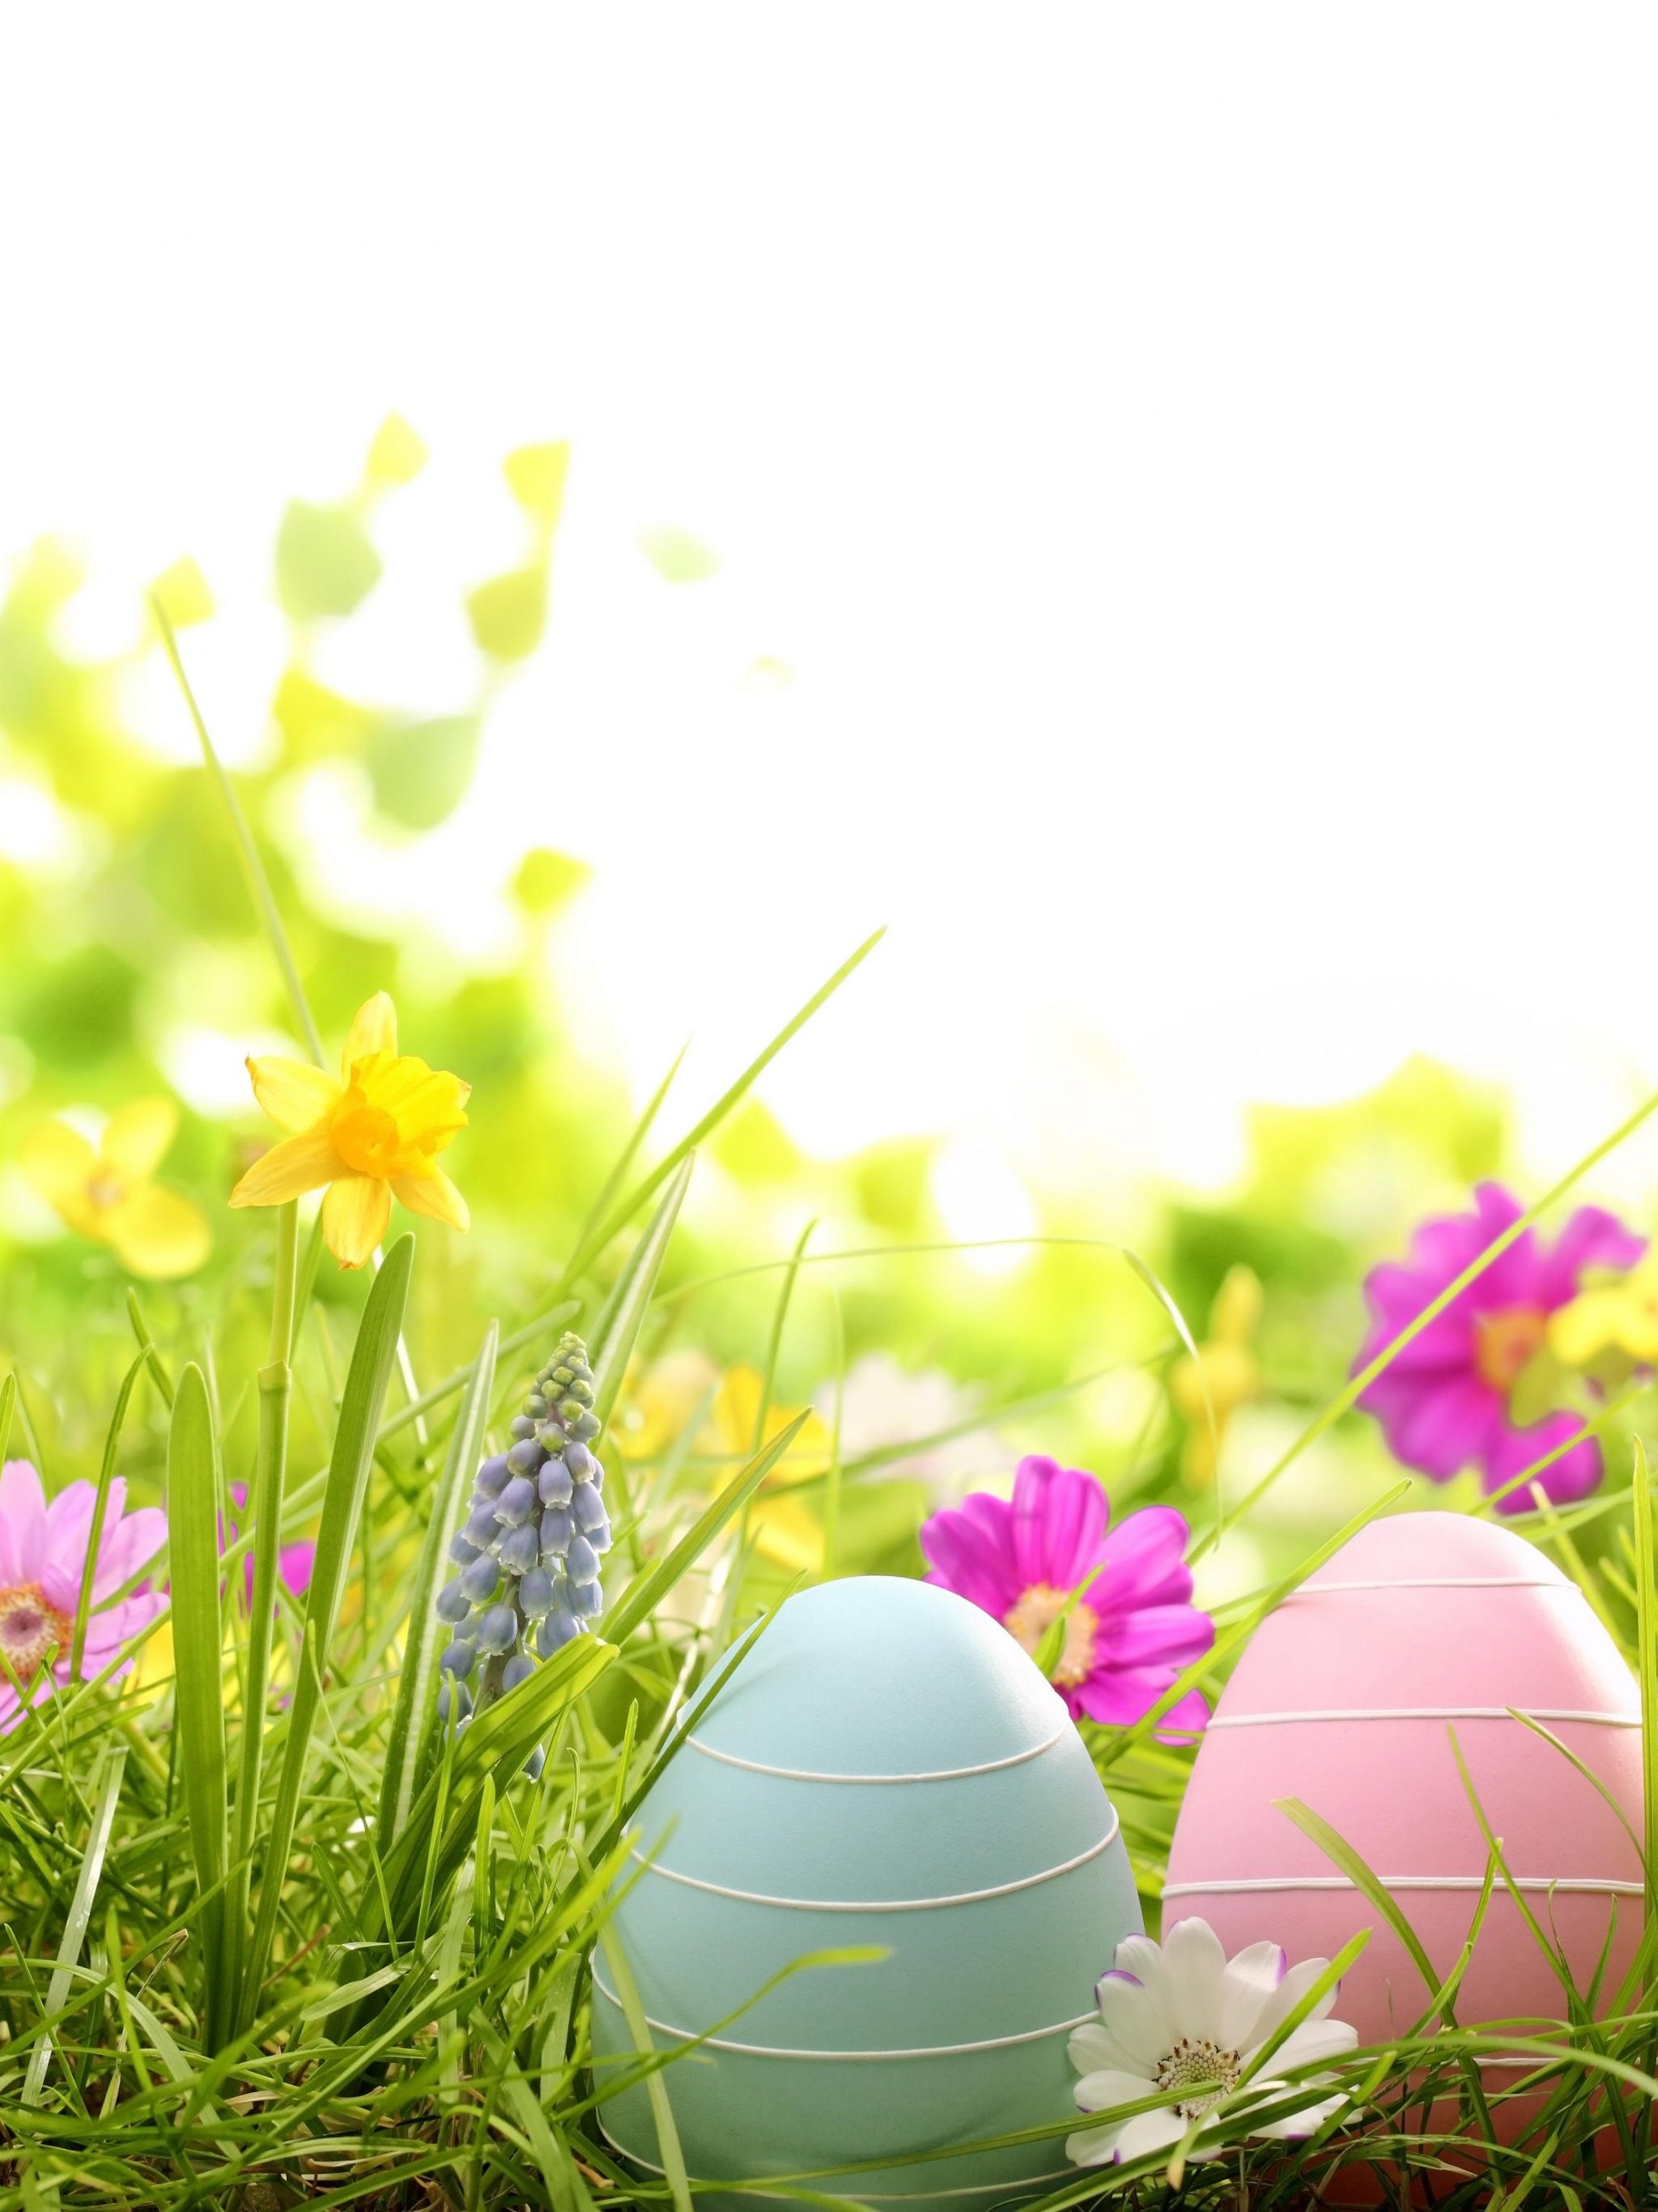 Free download Gallery For gt Pastel Easter Eggs Background